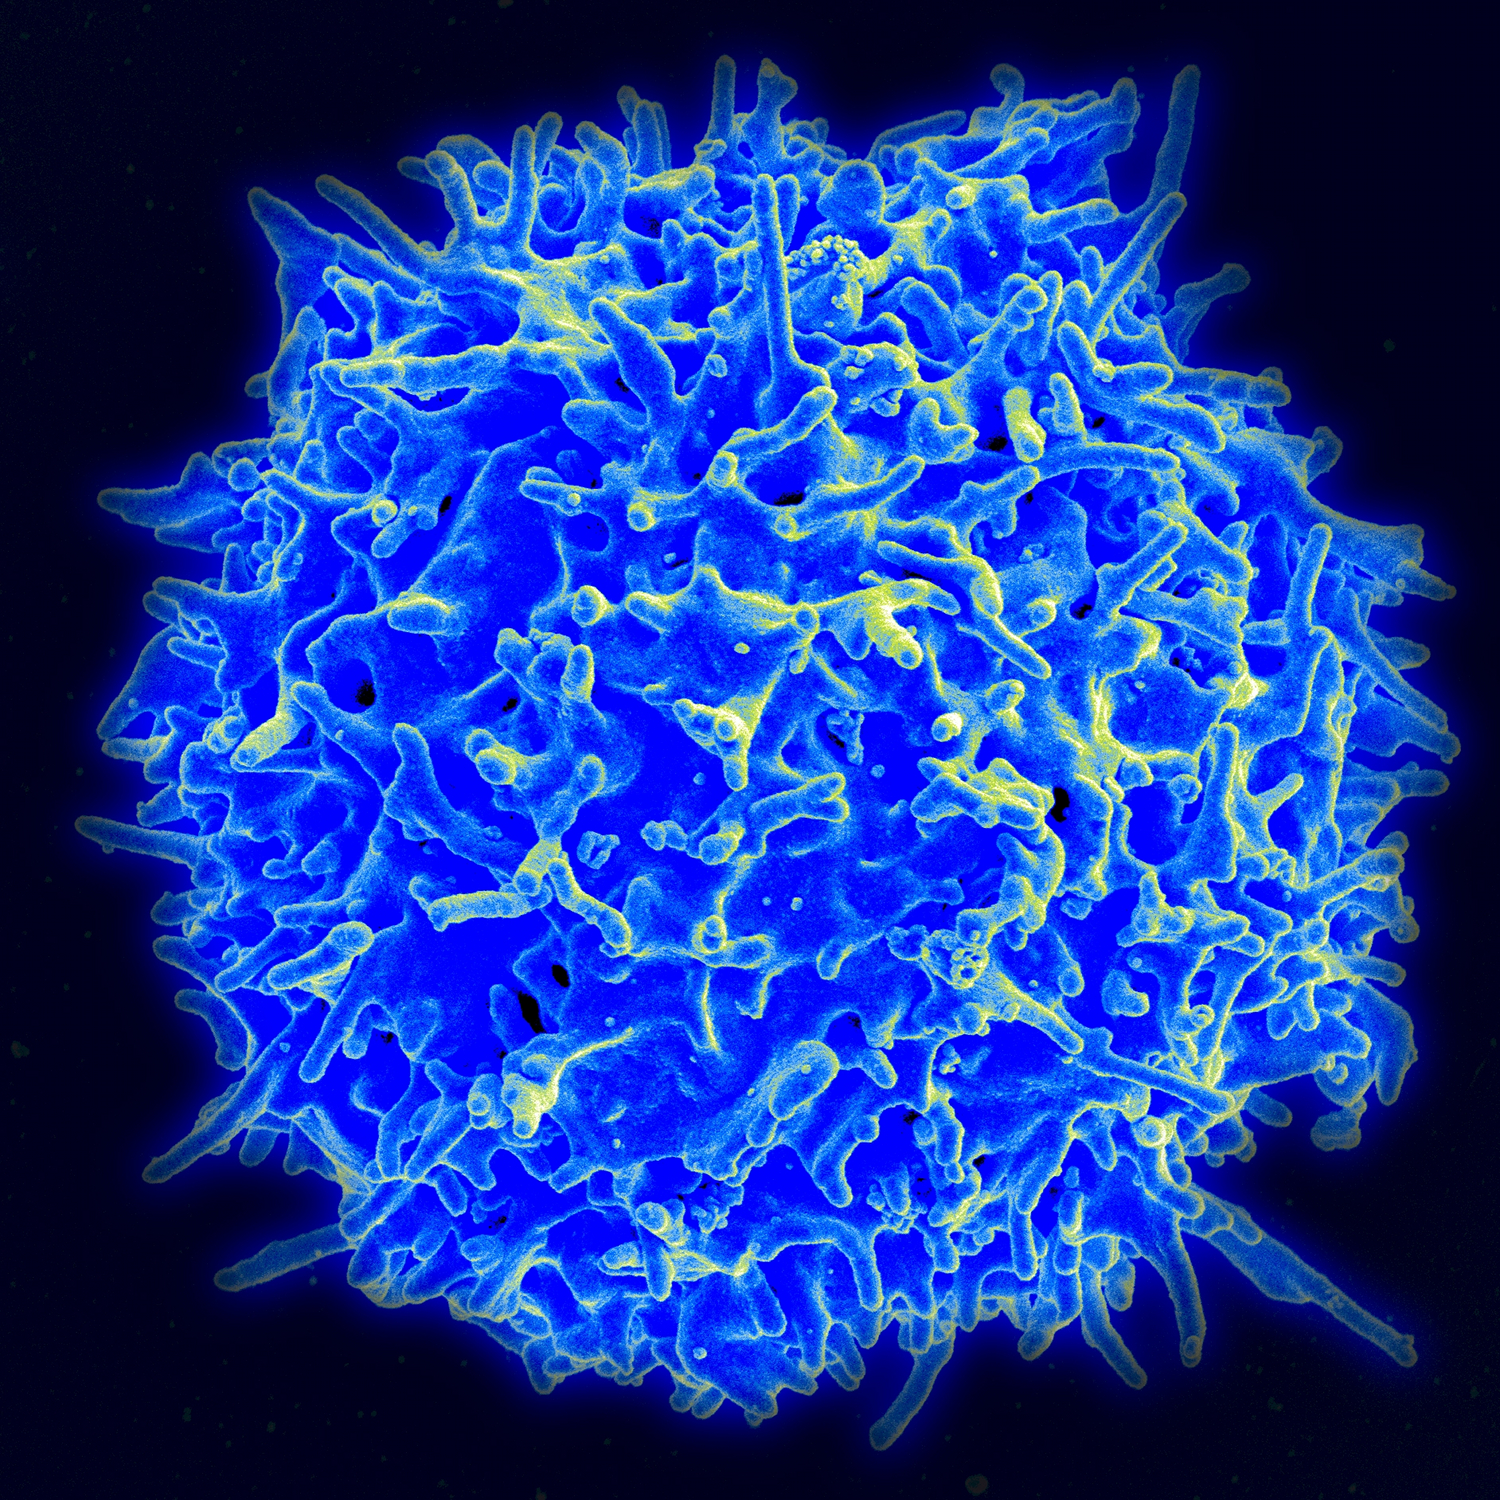 Scanning electron micrograph of a human T lymphocyte (also called a T cell) from the immune system of a healthy donor. Image by NIAID